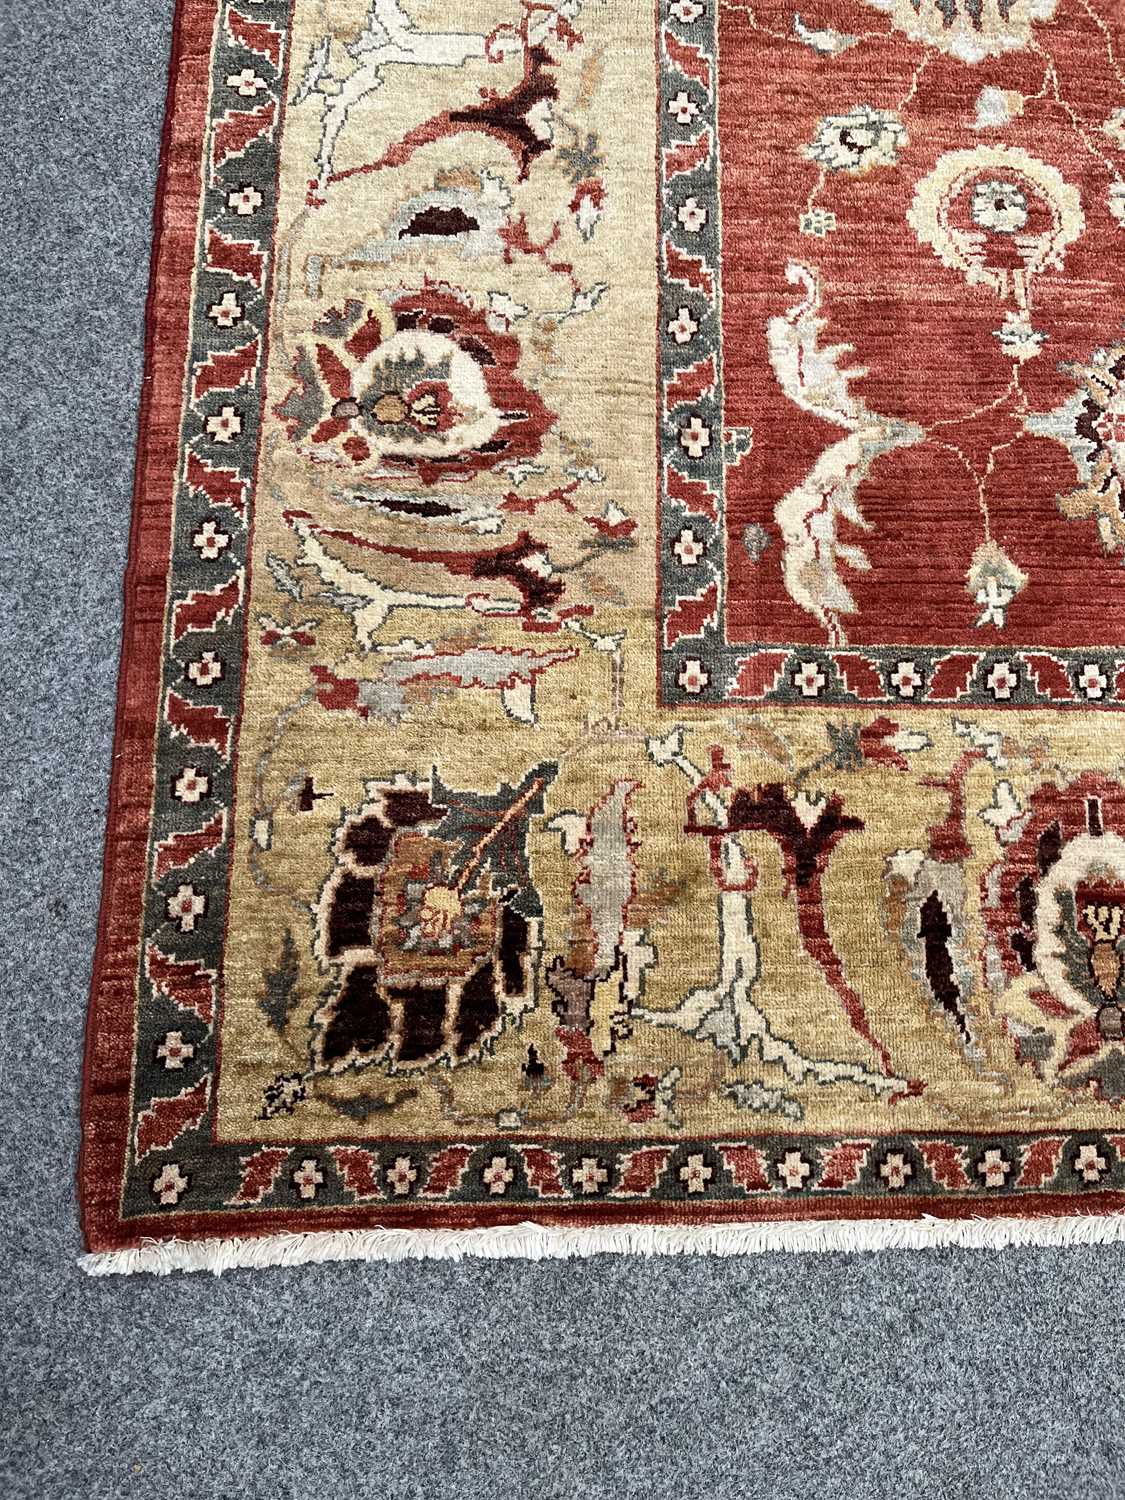 A LARGE RUG, 20TH CENTURY - Image 3 of 4